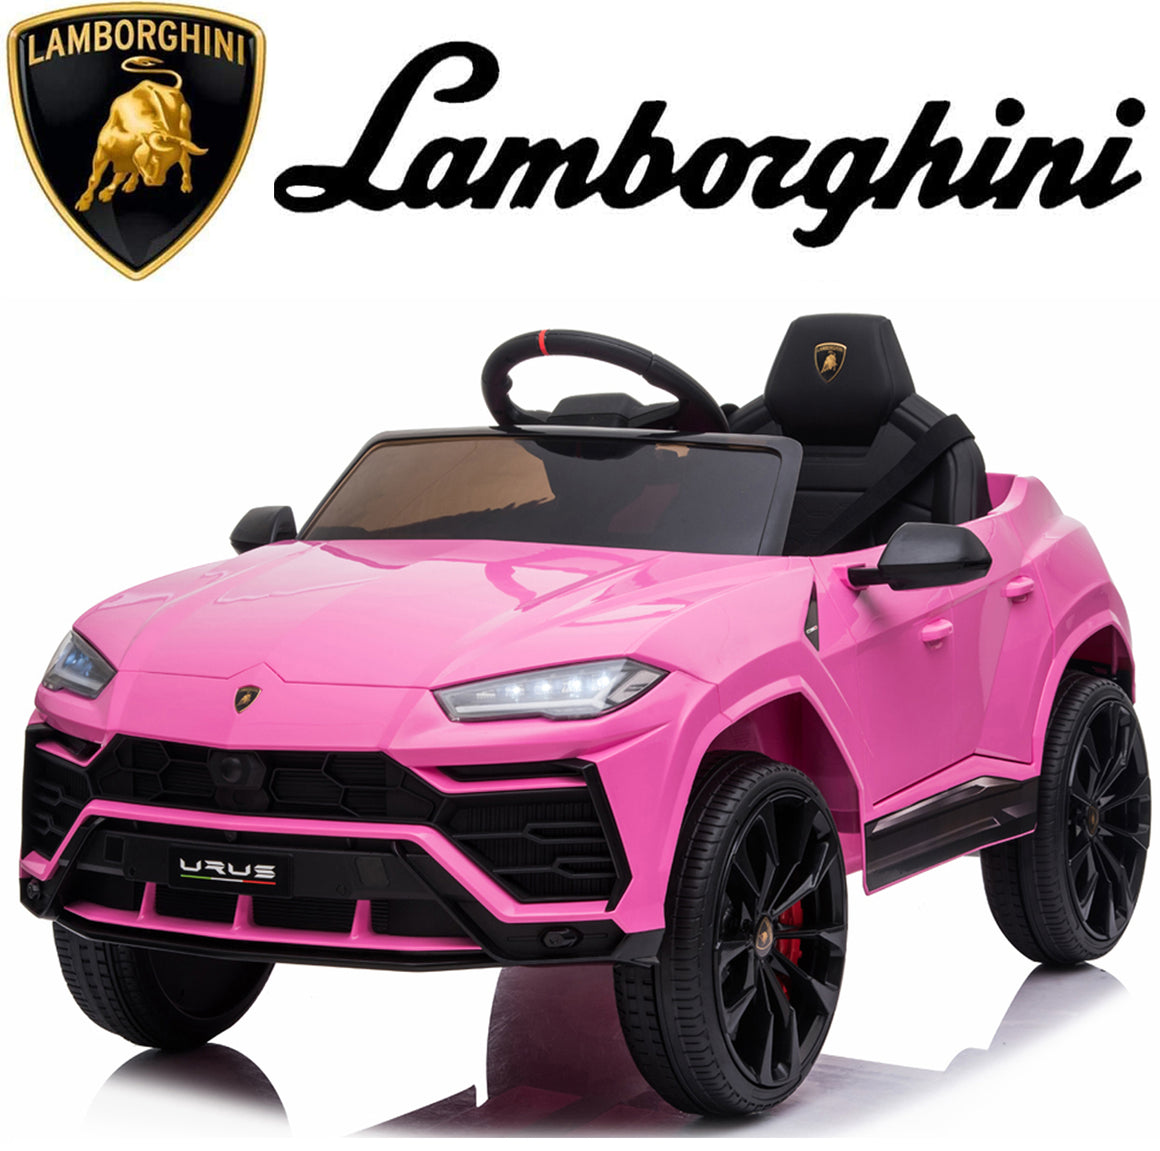 Ride on Toys for 3-4 Year Olds Boy Girl, Lamborghini 12 V Kids Ride On Car with Remote Control, Battery Powered Power Vehicles with LED Lights, MP3 Player, Horn, Birthday Gift, Black, W01